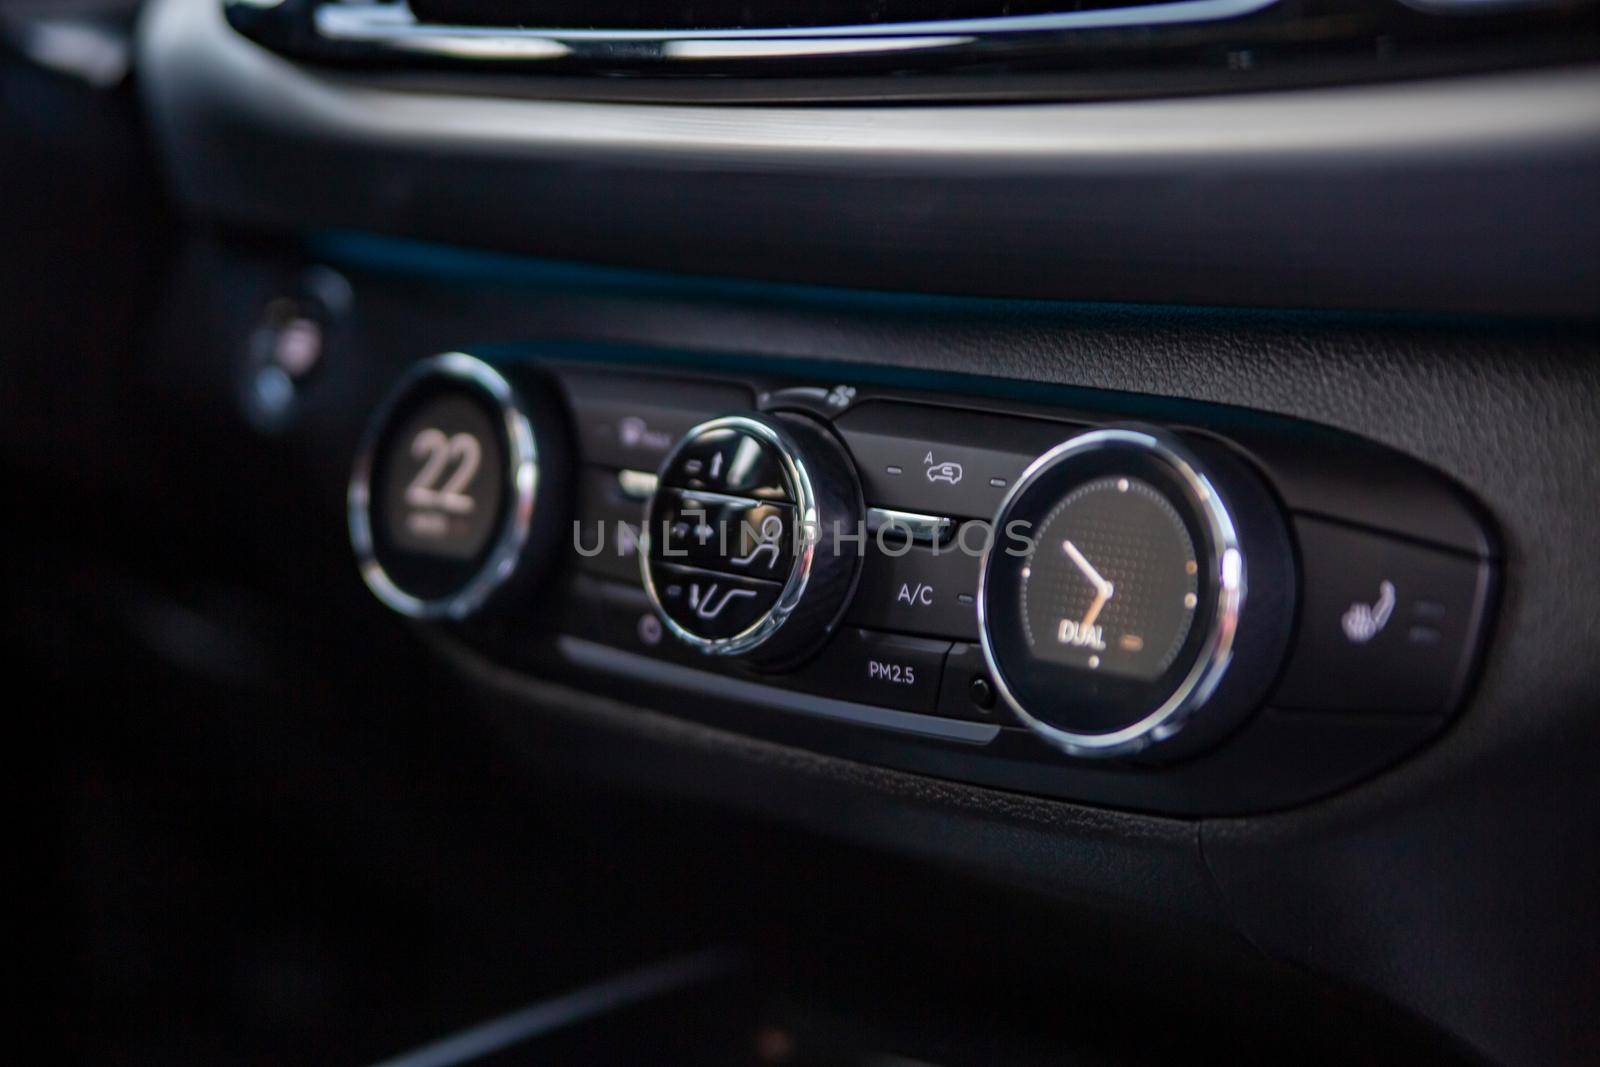 multimedia control console and climate in a modern car. close-up, selective focus, no people by Mariaprovector